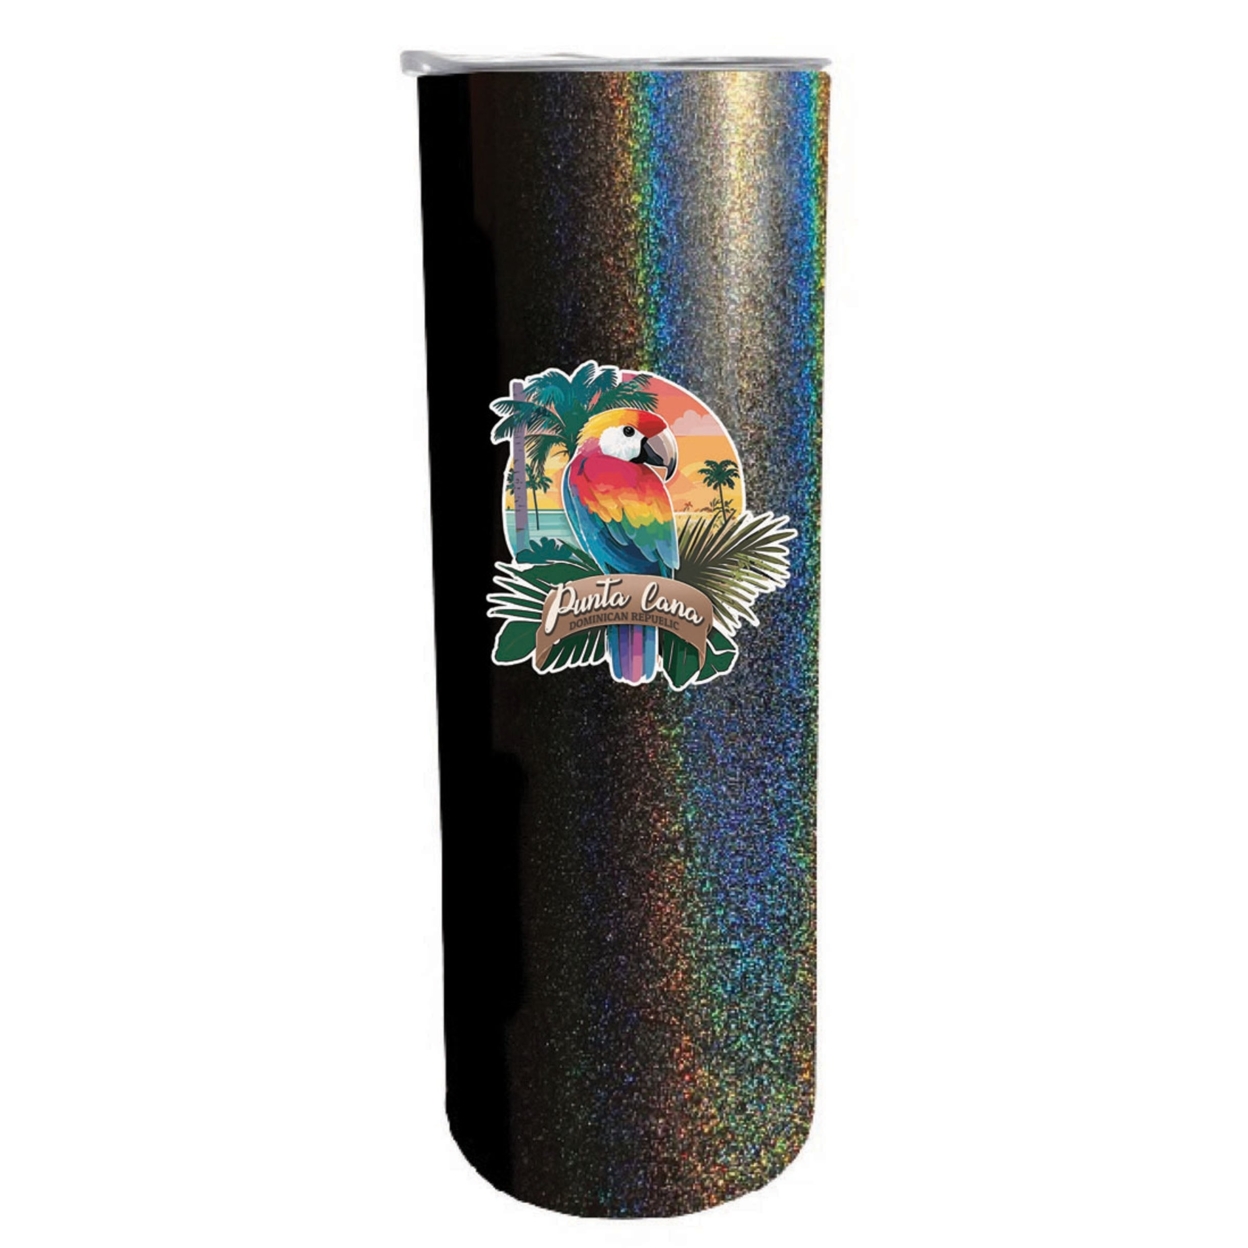 Punta Cana Dominican Republic Souvenir 20 Oz Insulated Stainless Steel Skinny Tumbler - Seafoam, PARROT B